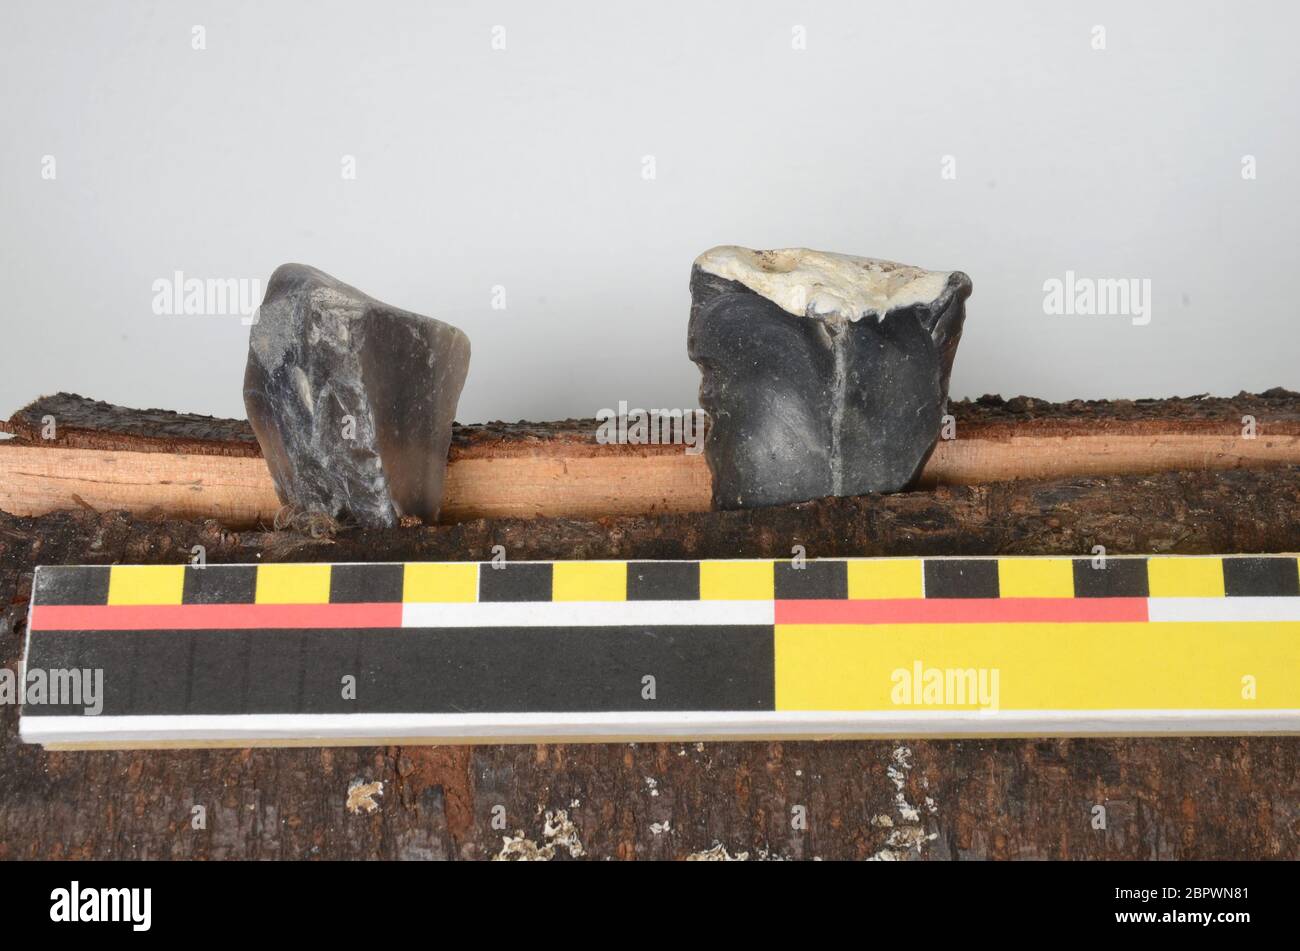 Two early stone age flint cores, used for their intentional purpose. They are likely manufactured circa 7000 years ago. The scale is in centimeters. Stock Photo